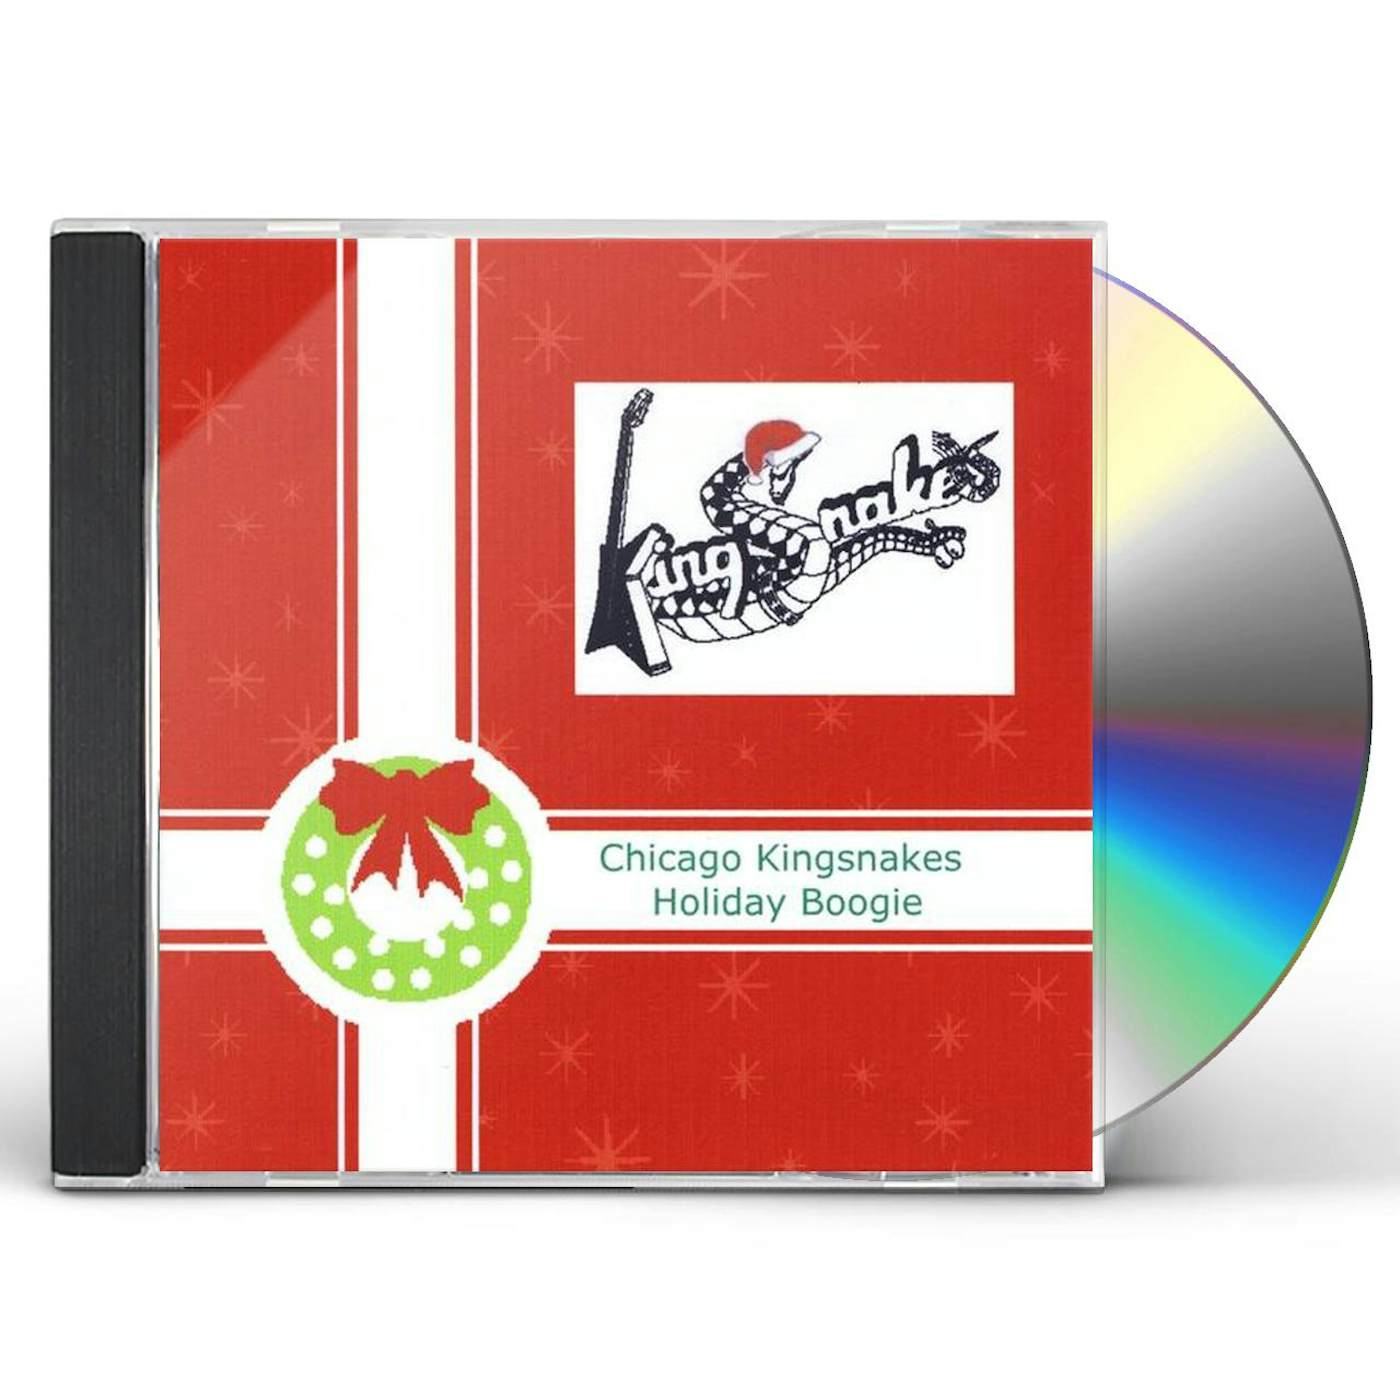 The Kingsnakes HOLIDAY BOOGIE CD